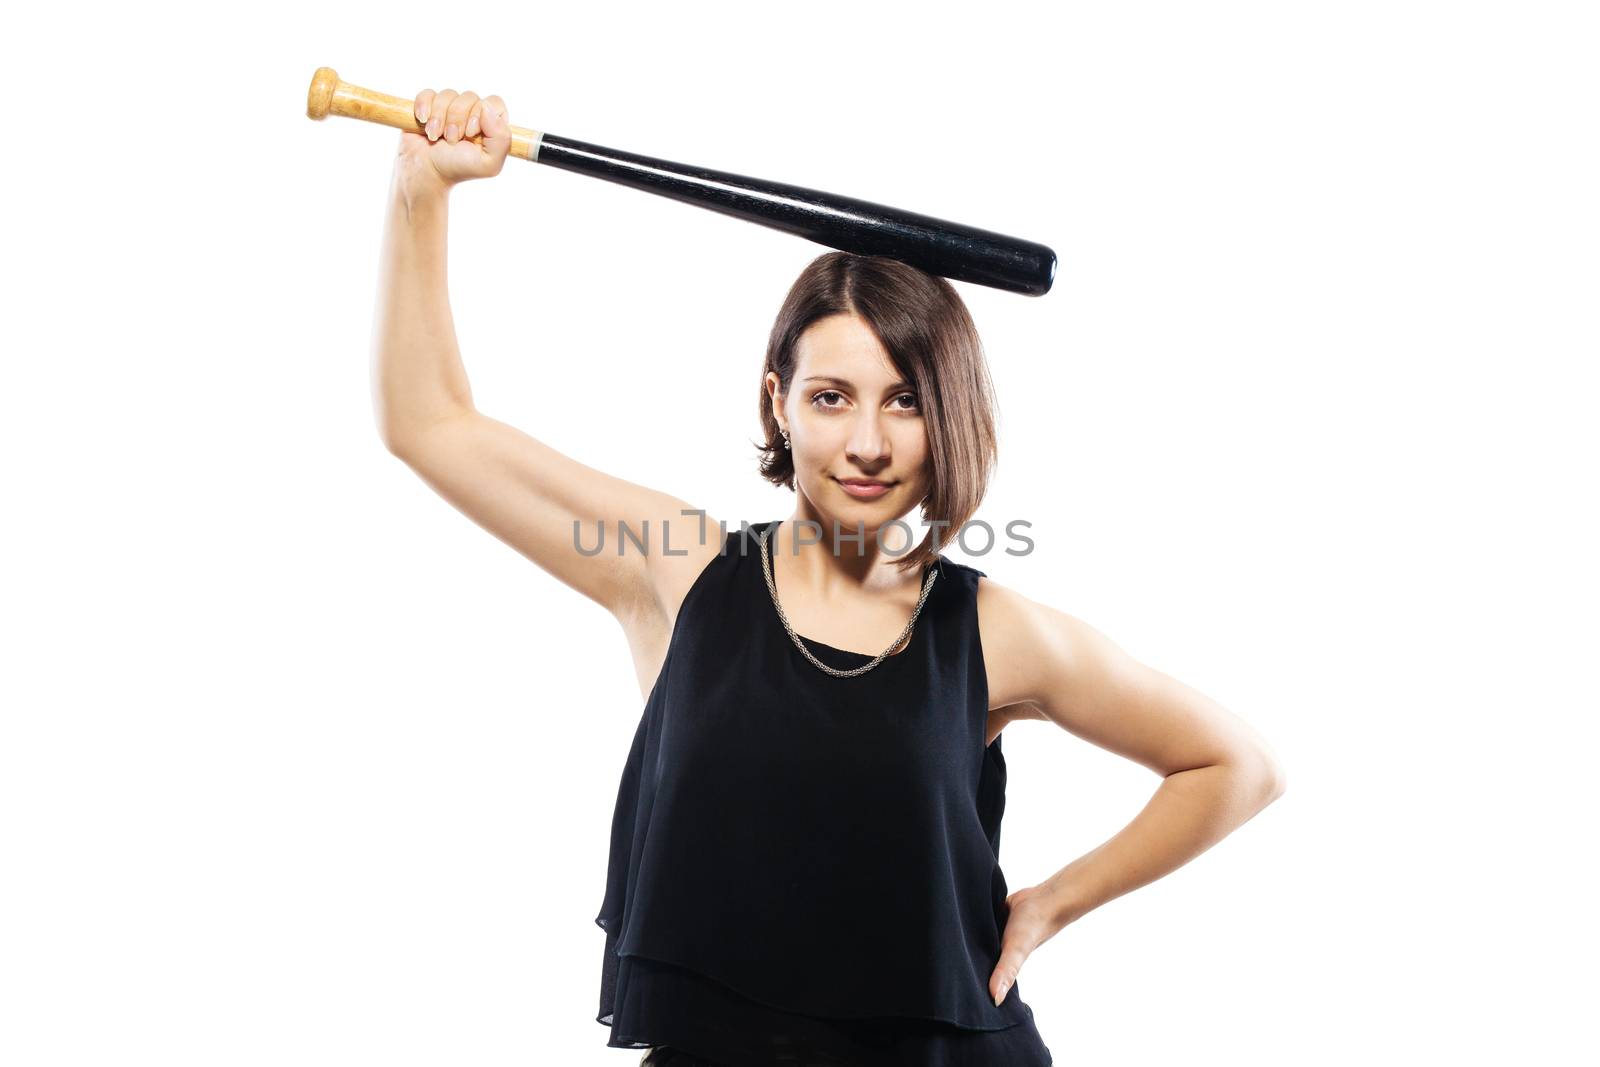 girl in camouflage pants holding a baseball bat, isolated on white